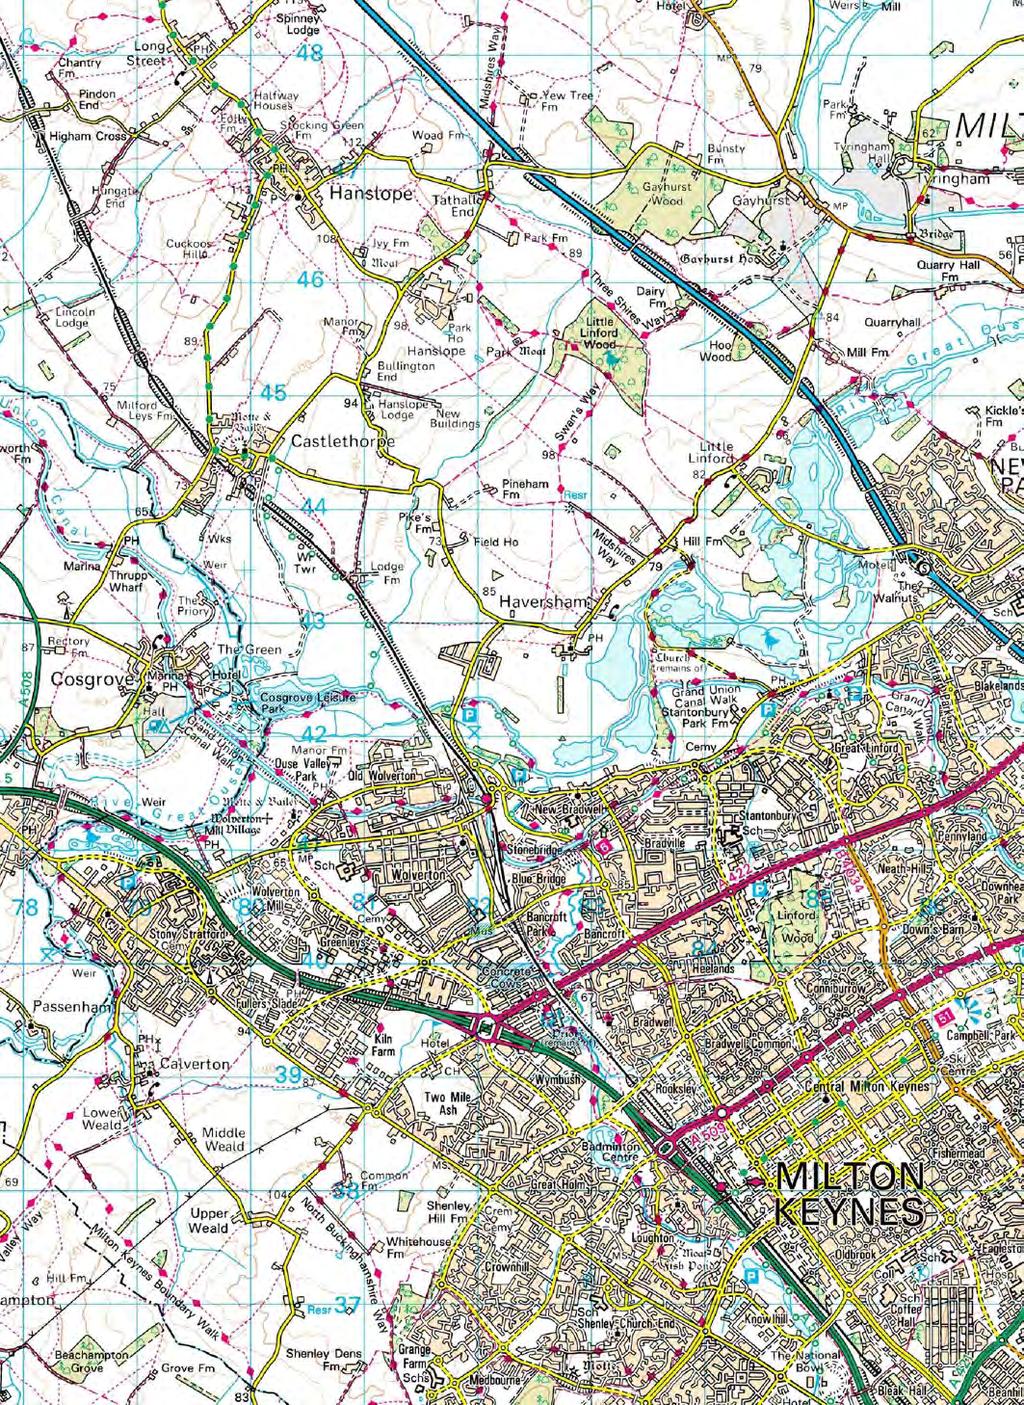 KEY SITE LOCATION REPRODUCED FROM ORDNANCE SURVEY DIGITAL MAP DATA CROWN COPYRIGHT 20 12. ALL RIGHTS RESERVED.